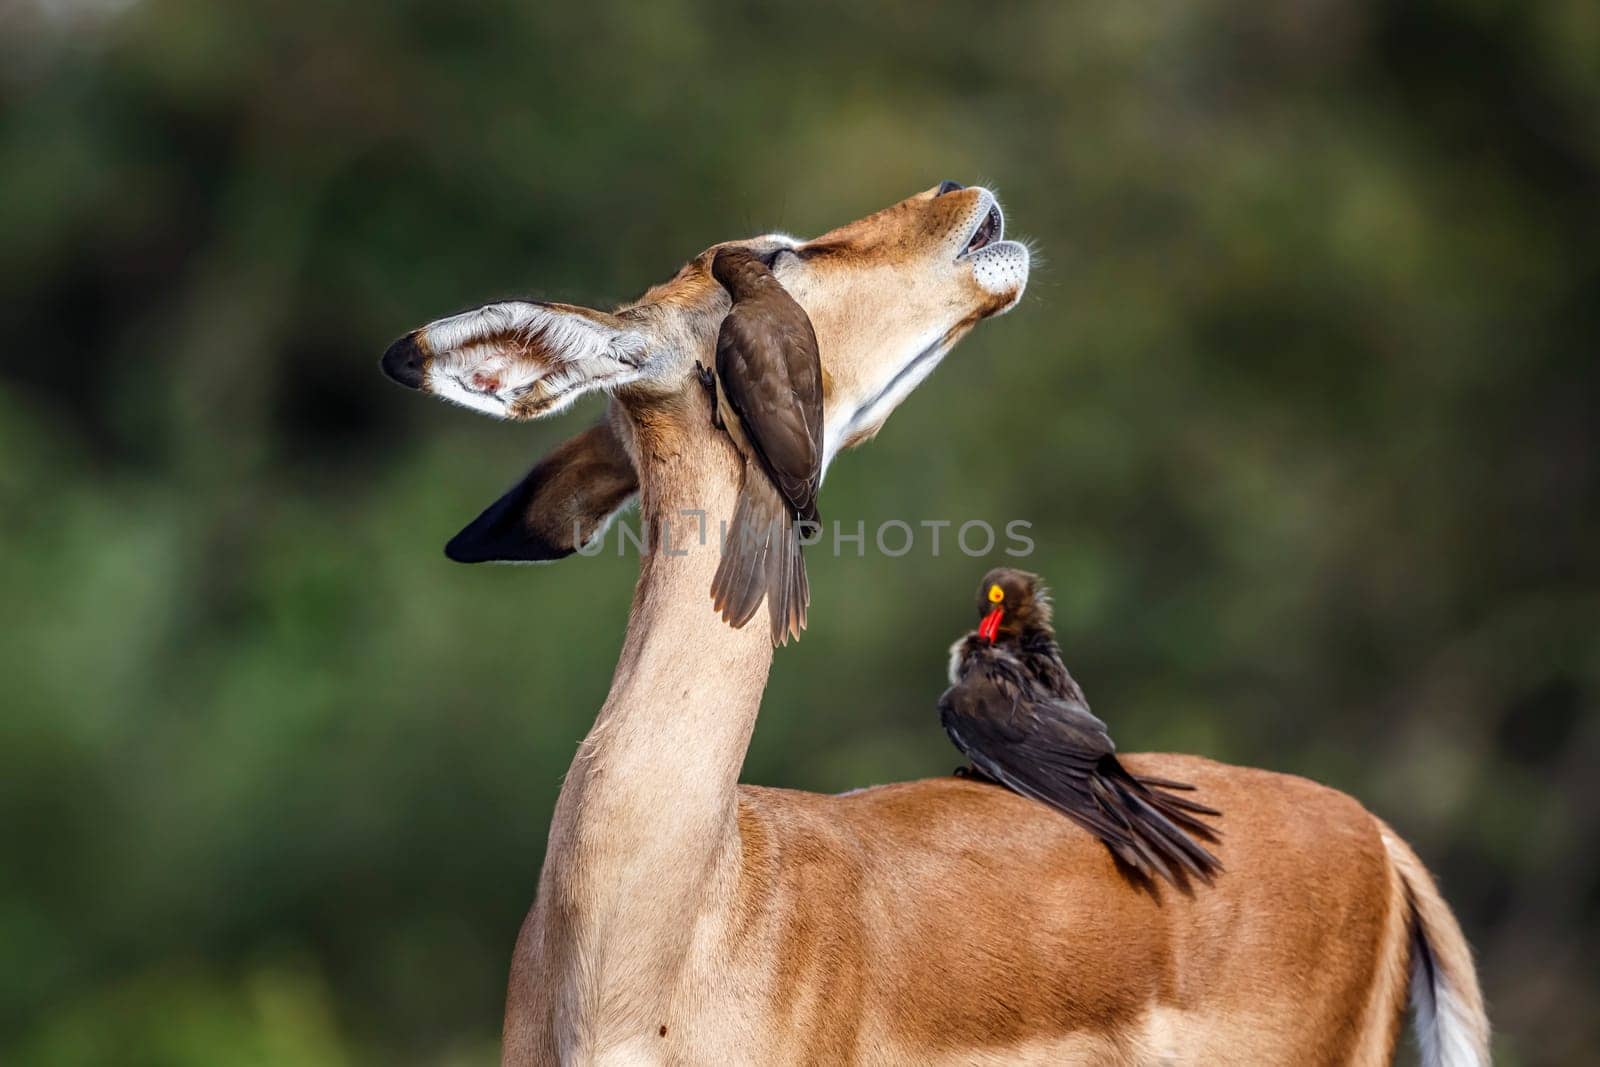 Three Red billed Oxpecker grooming common impala in Kruger National park, South Africa ; Specie Buphagus erythrorhynchus family of Buphagidae